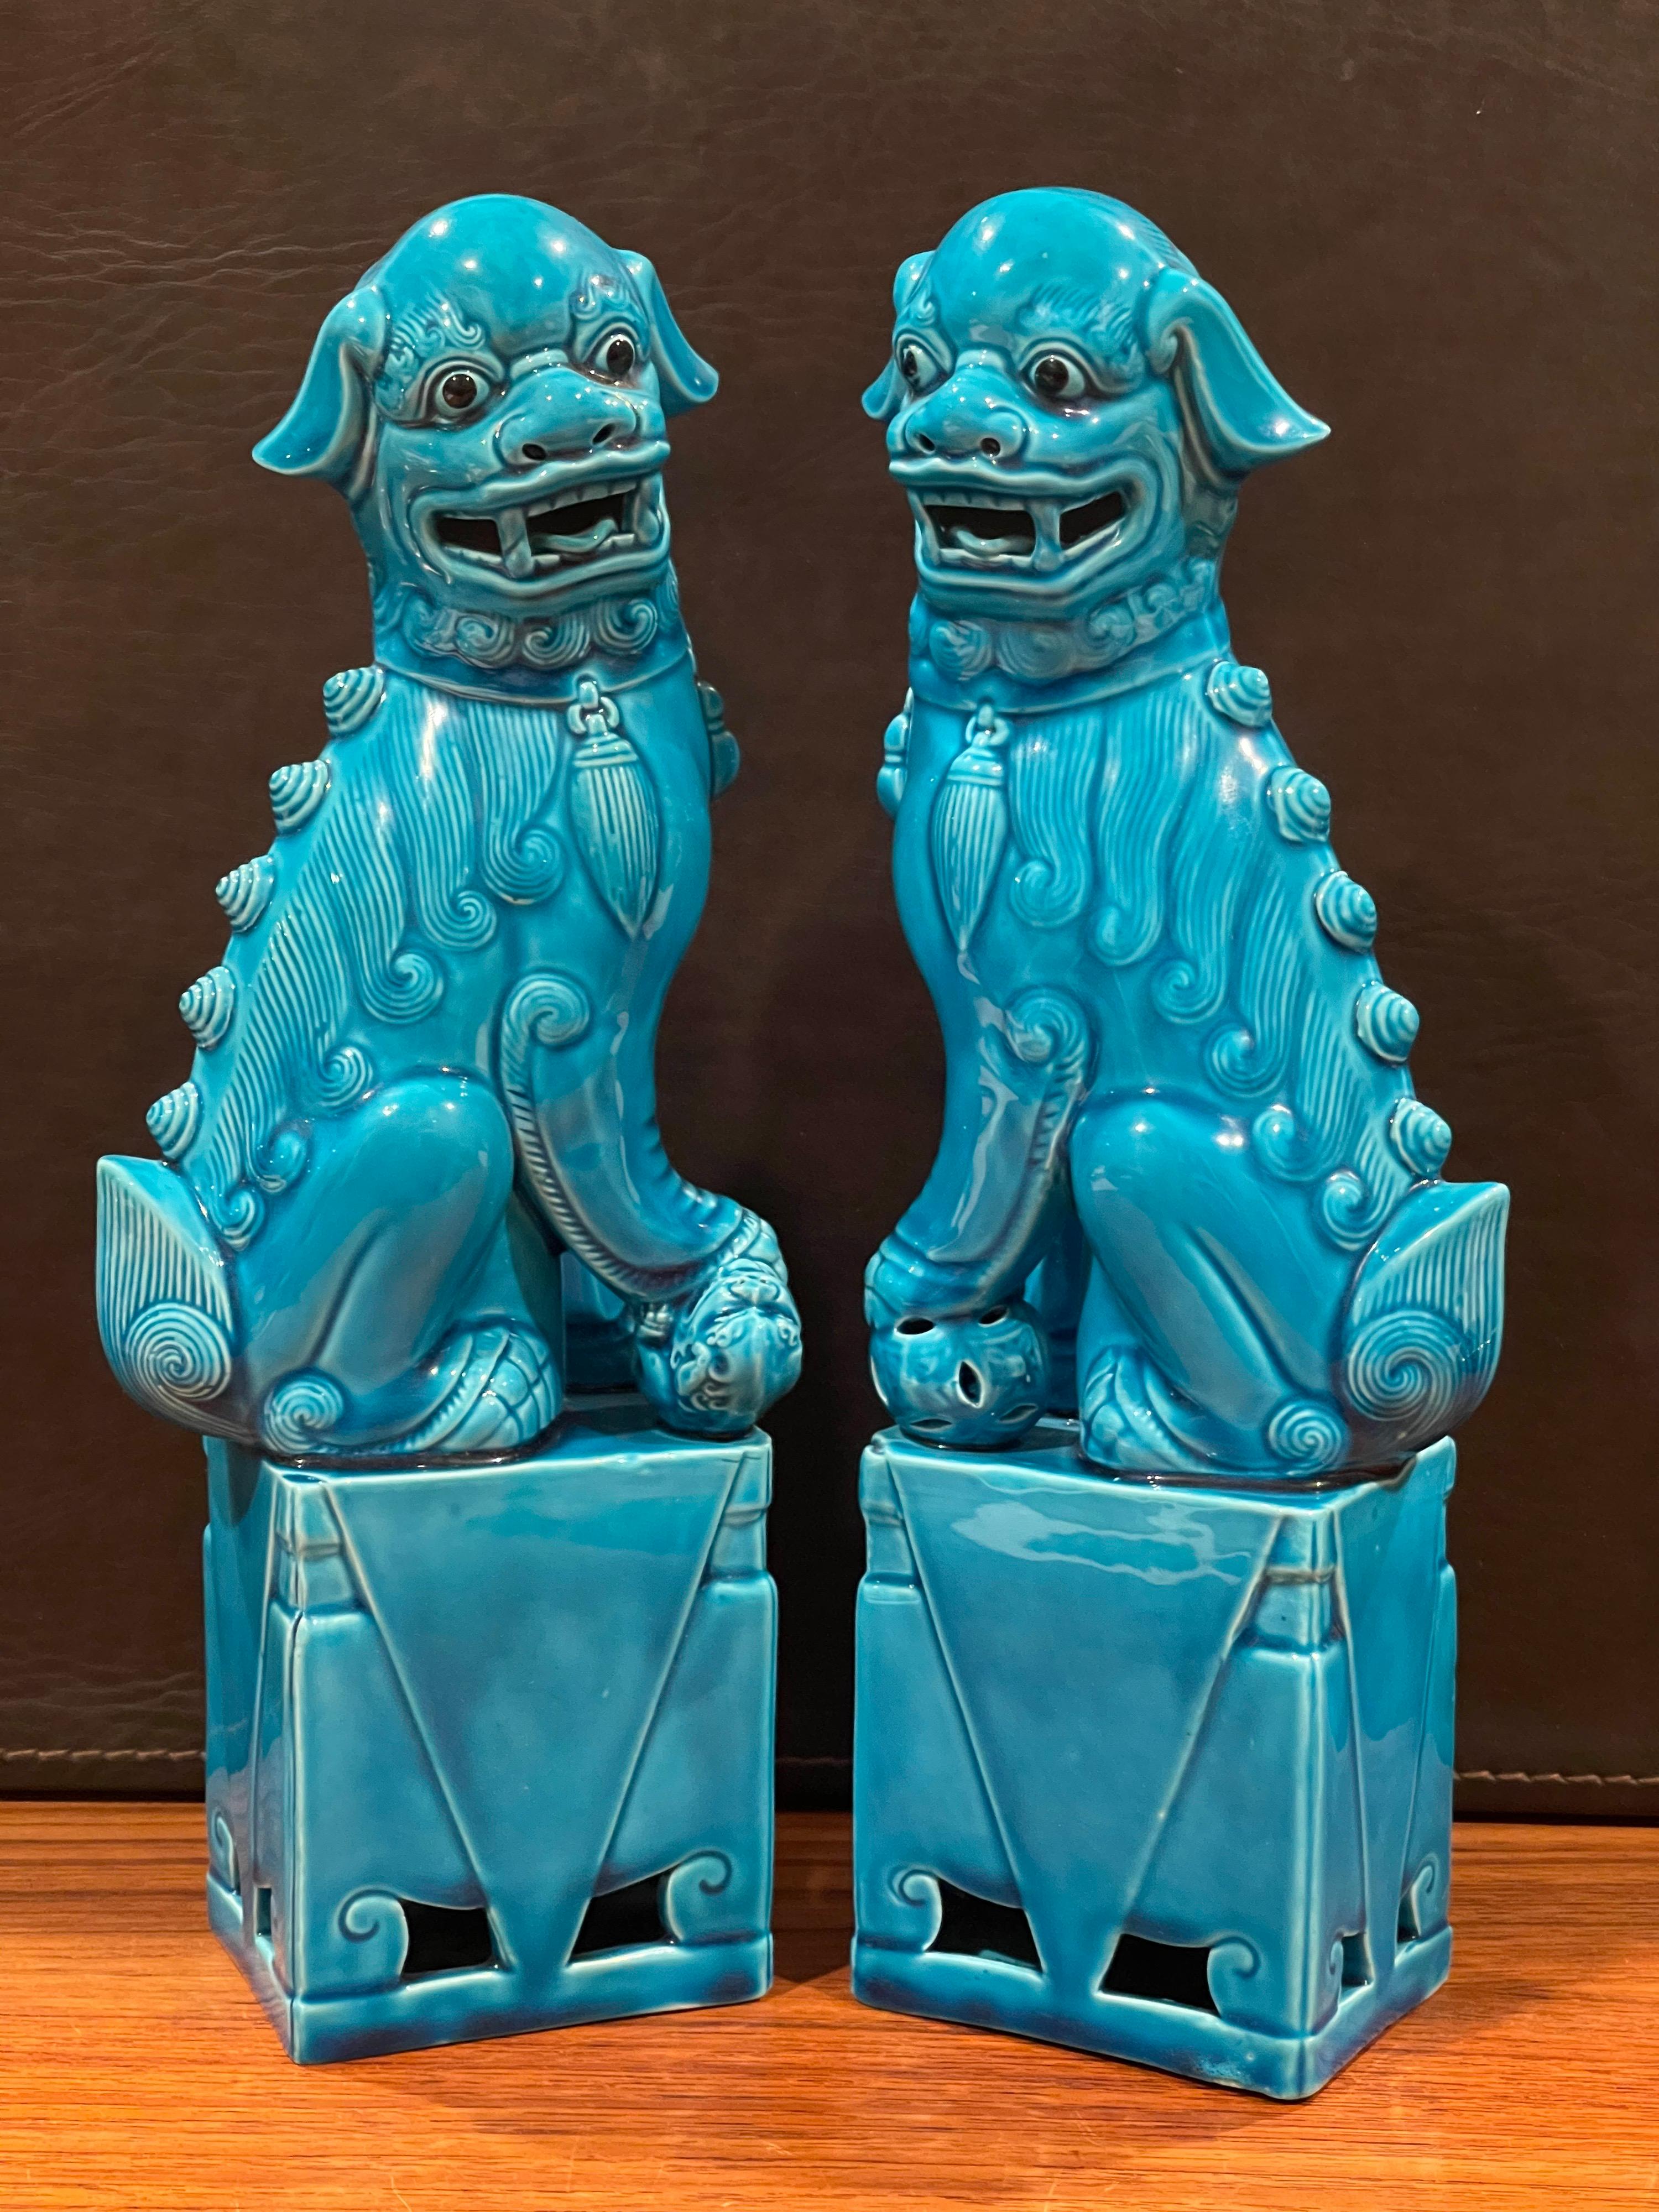 Excellent pair of mid-century turquoise blue ceramic foo dog sculptures, circa 1960s. These symbolic guardians present a beautiful turquoise hue and are in very good vintage condition with no chips or cracks. The dogs measure 9.5